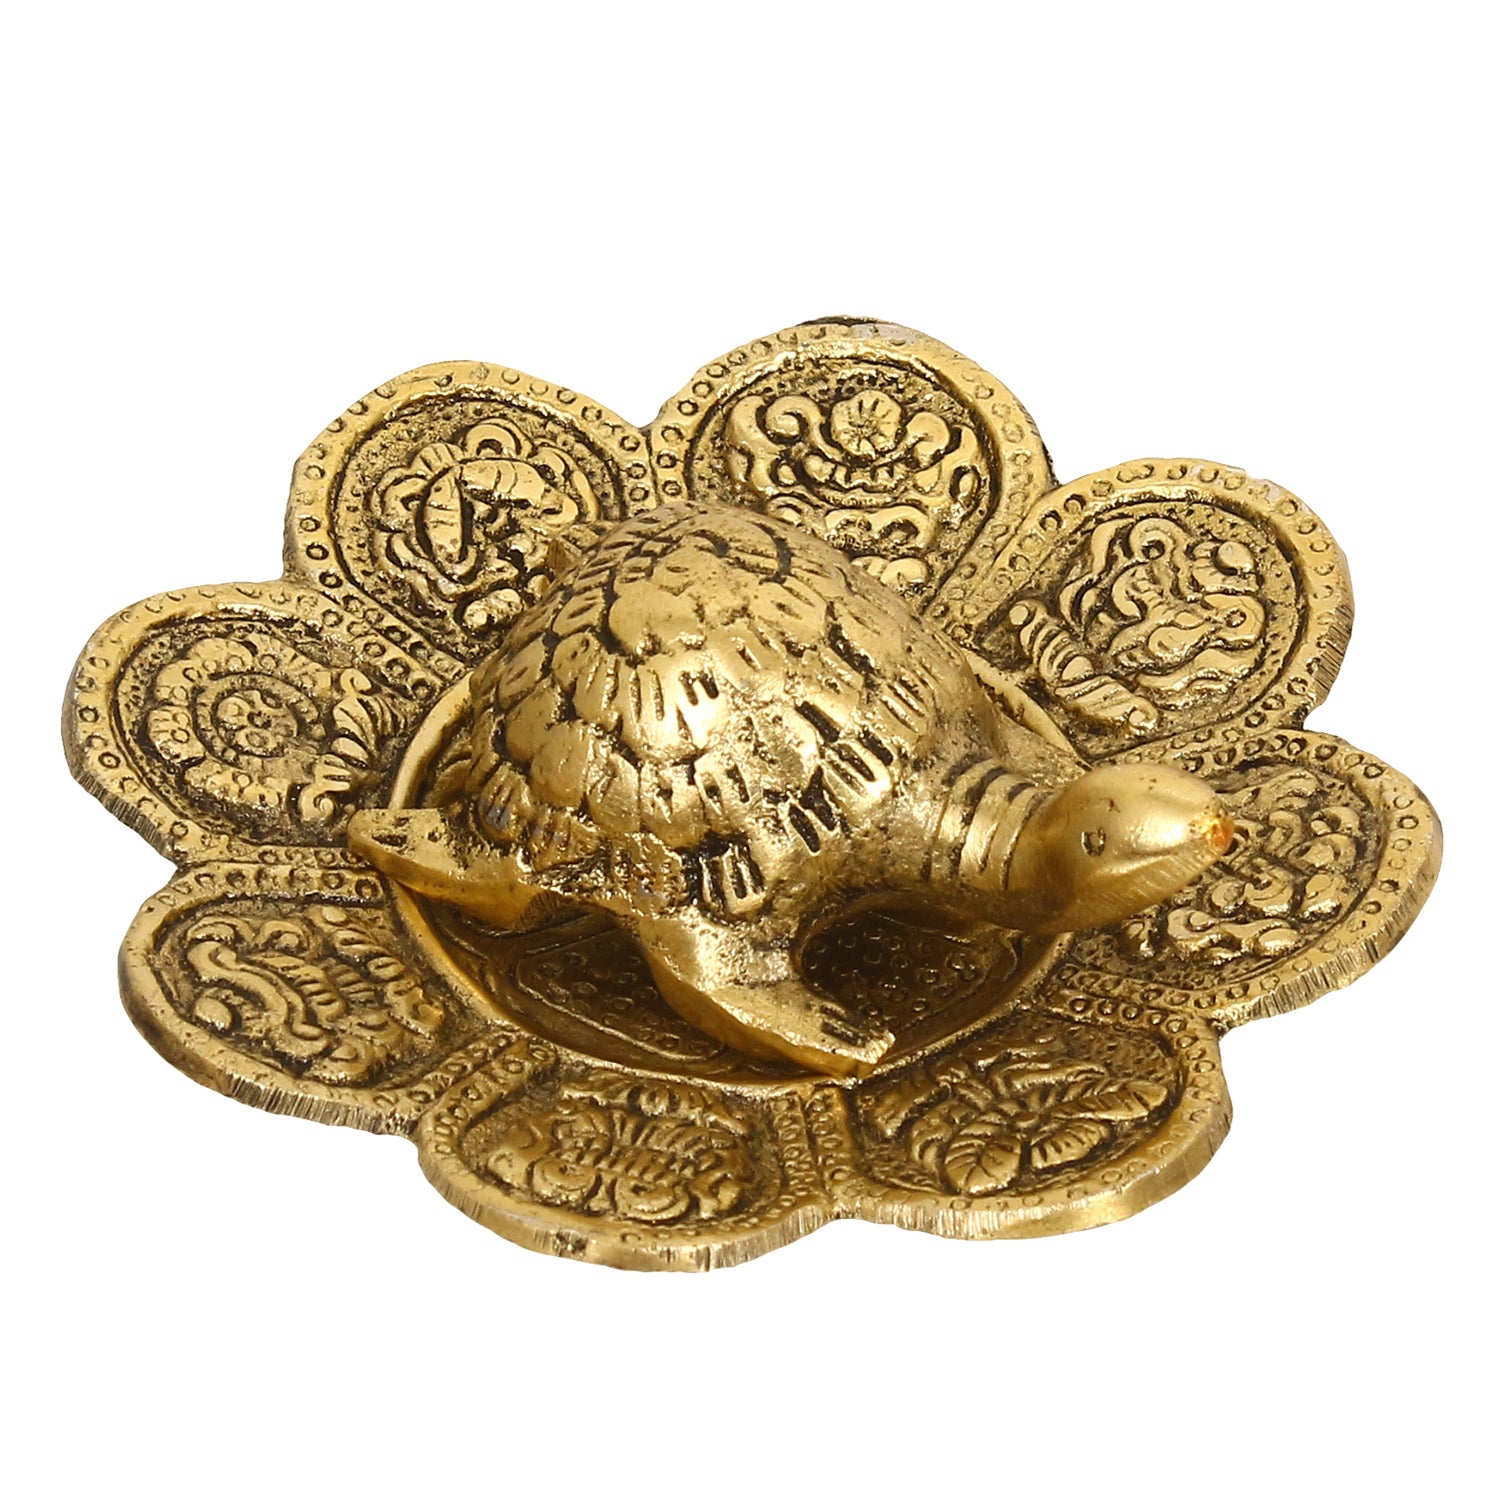 Feng Shui Tortoise with decorative plate for offices and home 5